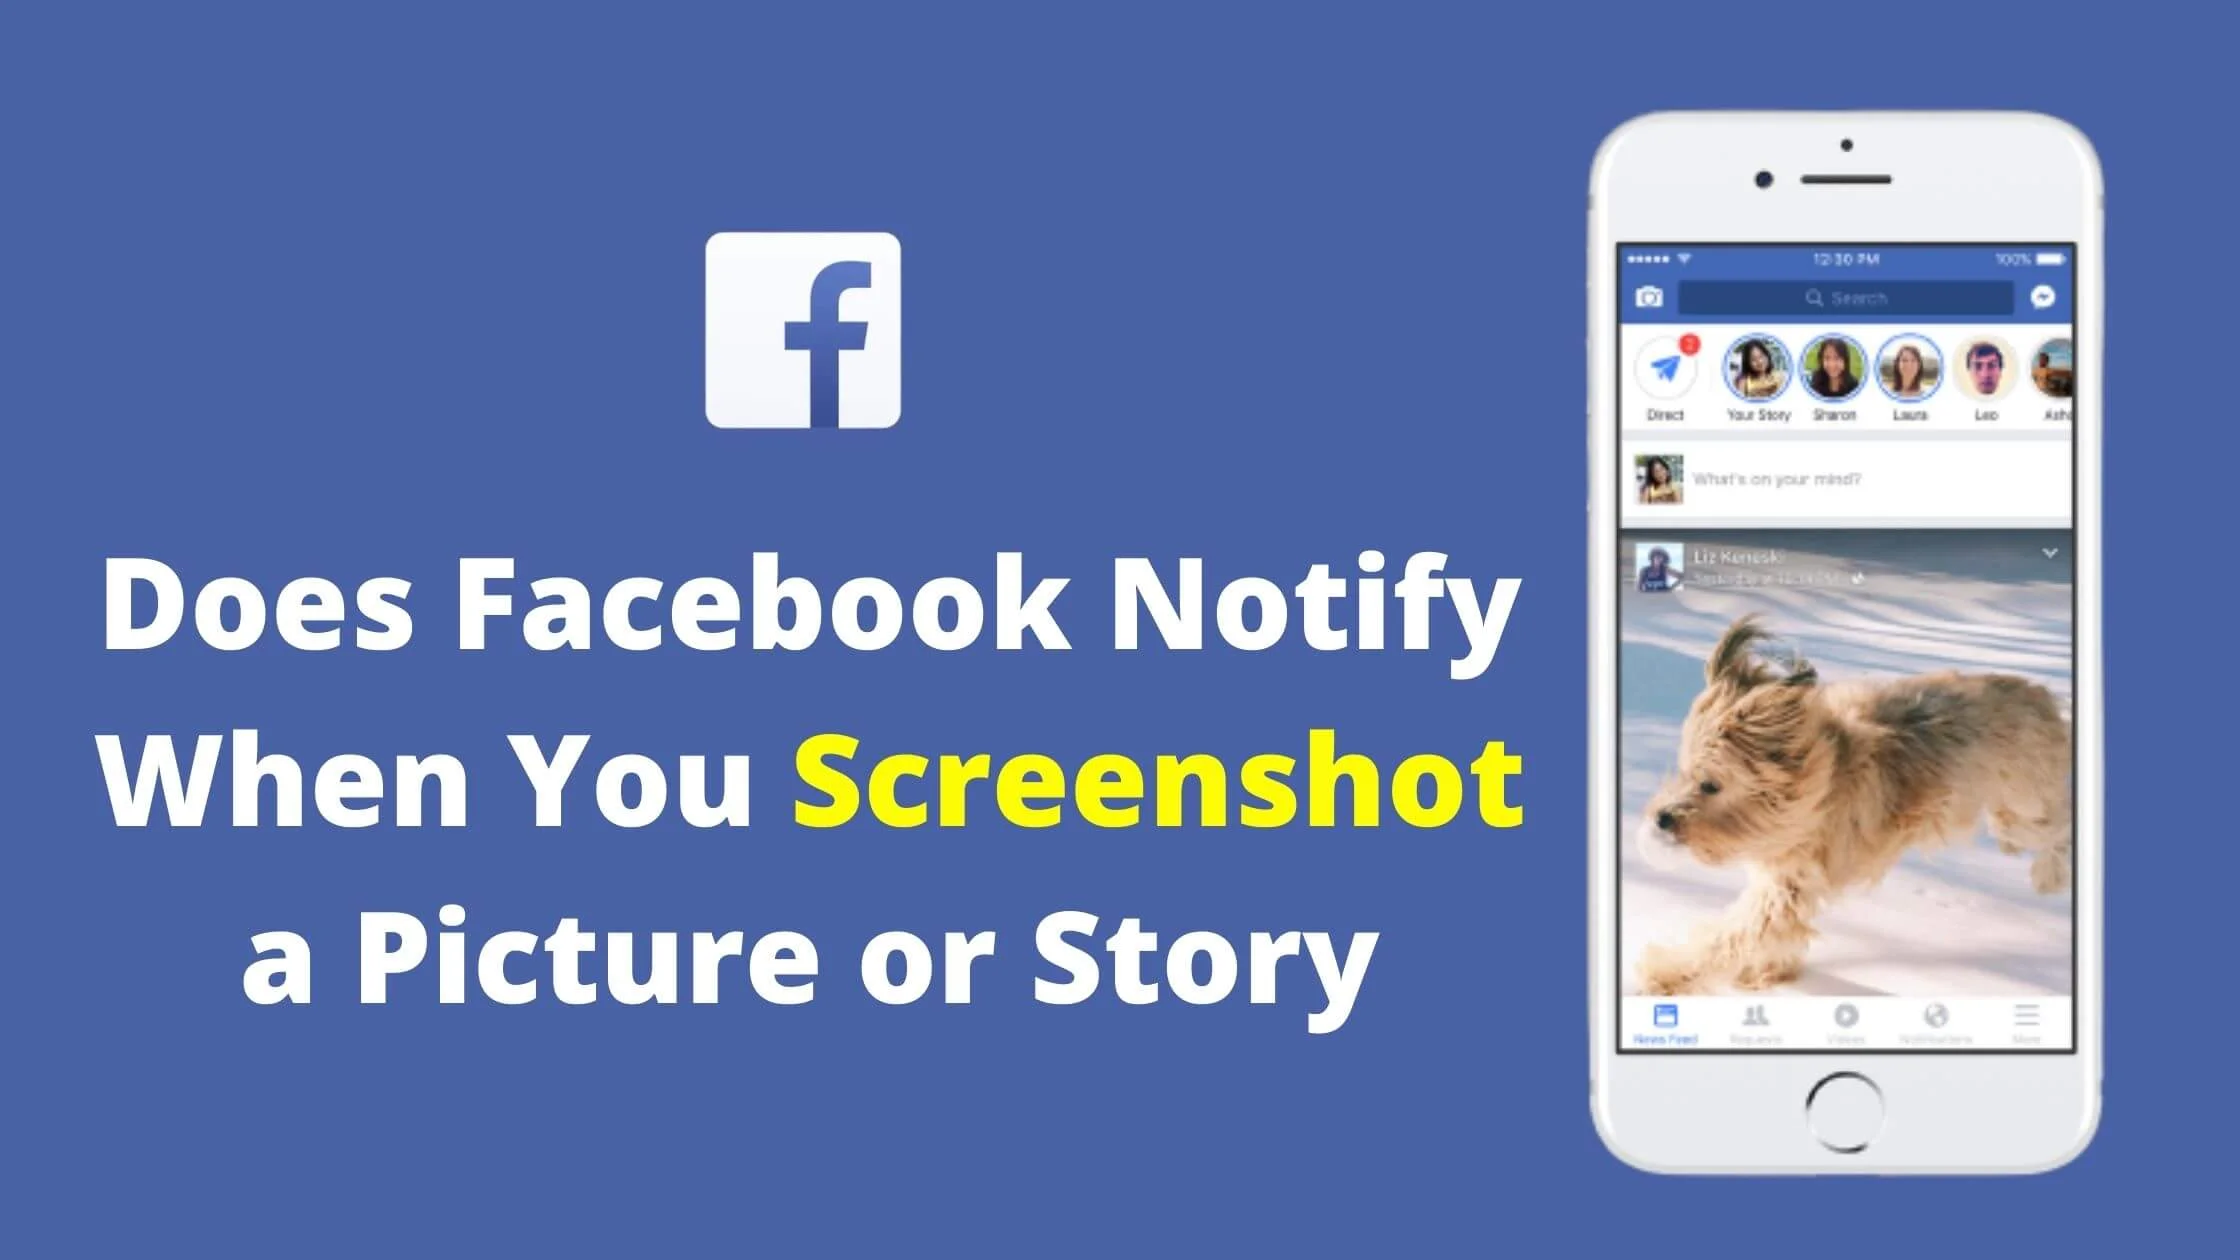 Does Facebook Notify When You Screenshot a Picture or Story